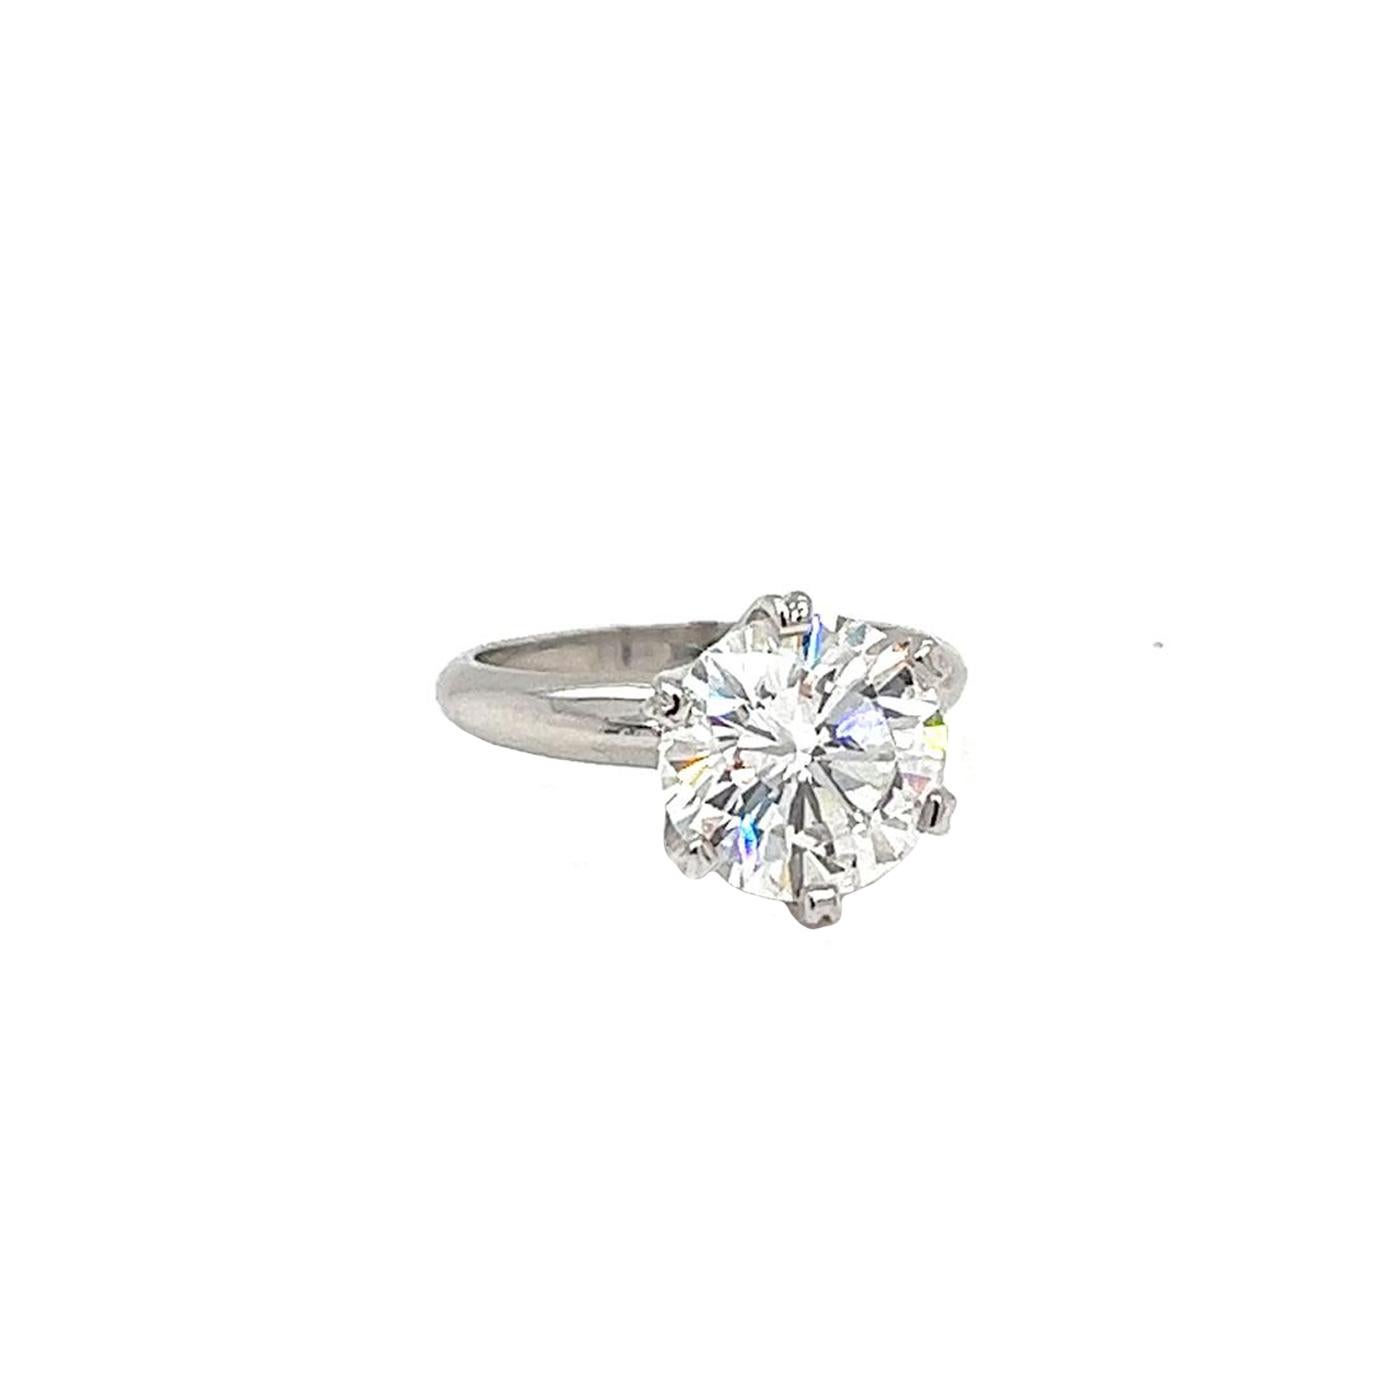 3.10ct Natural Round Diamond Solitaire Ring 6 Prong 14K White Gold Si2 Clarity For Sale 2